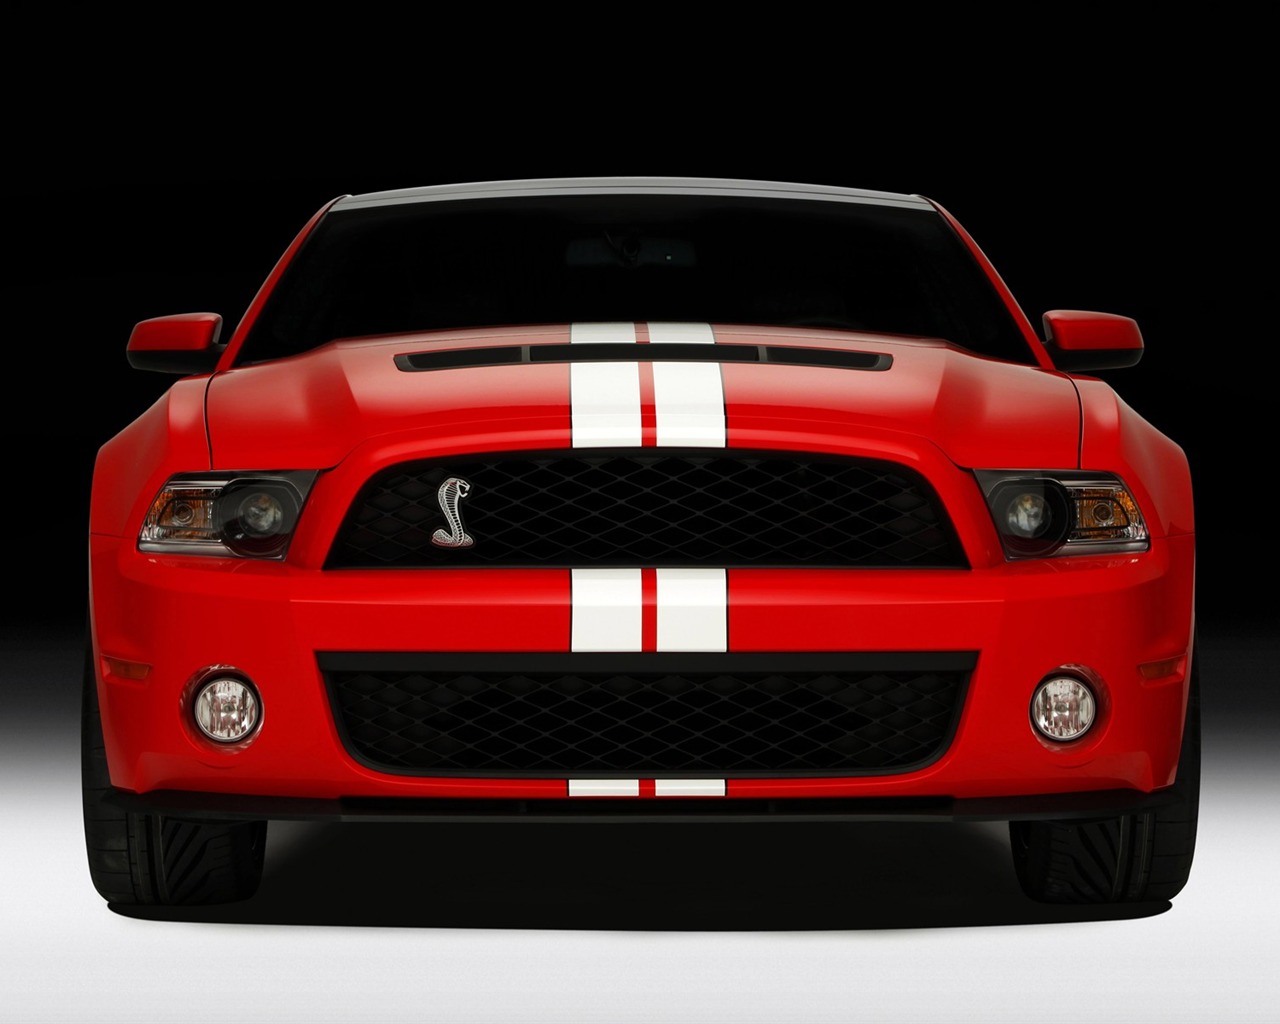 Ford Mustang GT500 Wallpapers #5 - 1280x1024